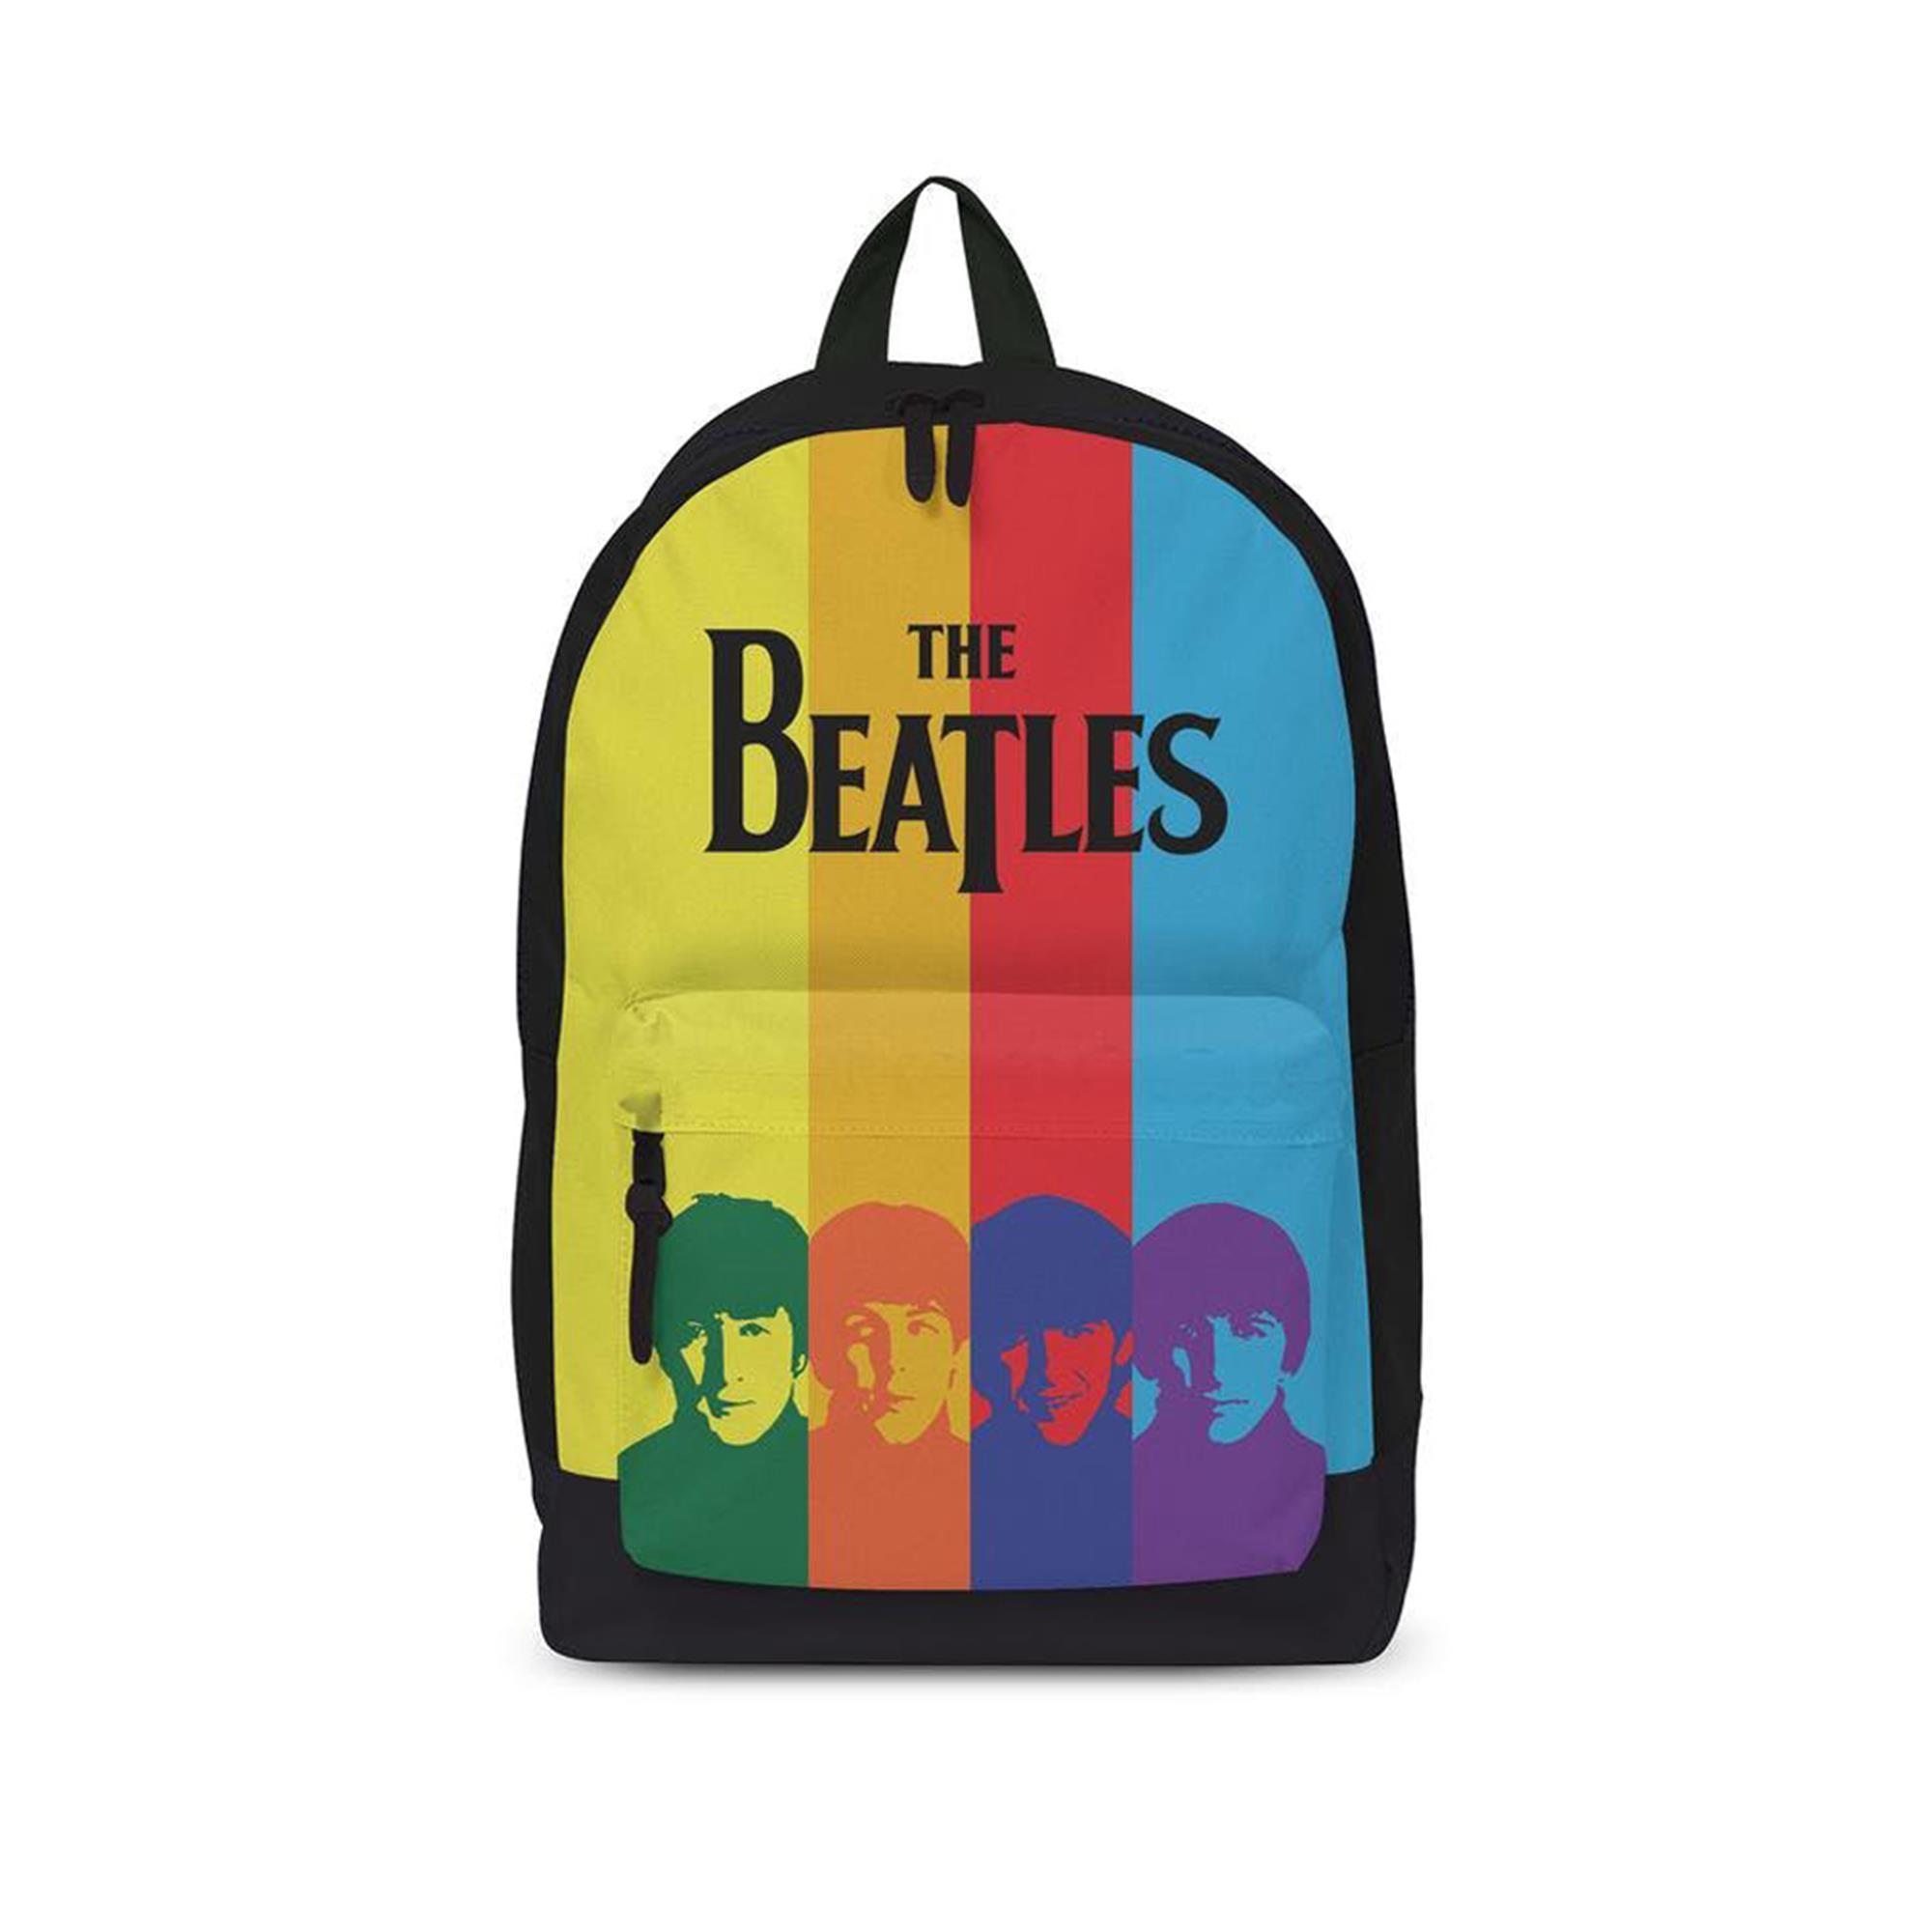 The Beatles Hard Days Night Backpack